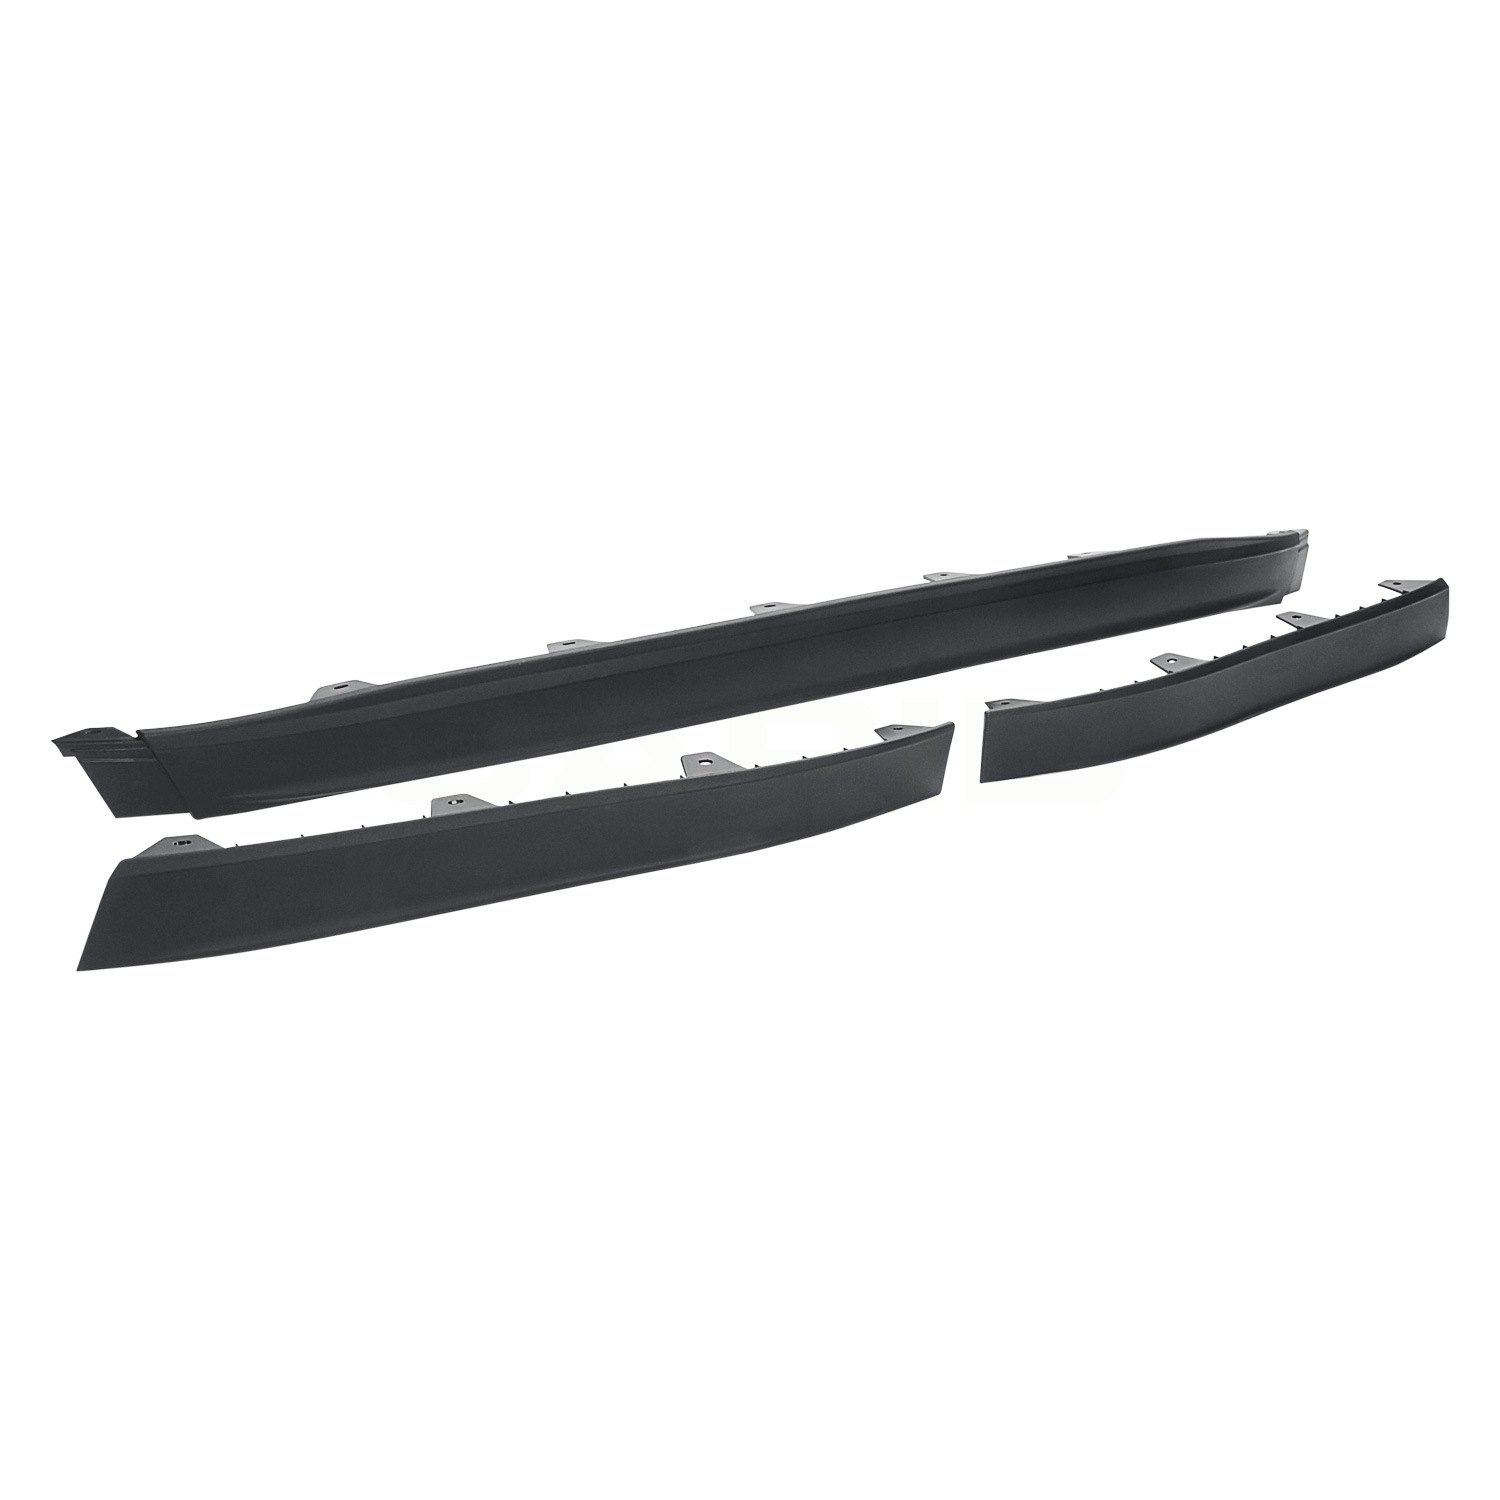 For Chevy Malibu Limited 2016 Replace Front Lower Bumper Air Deflector